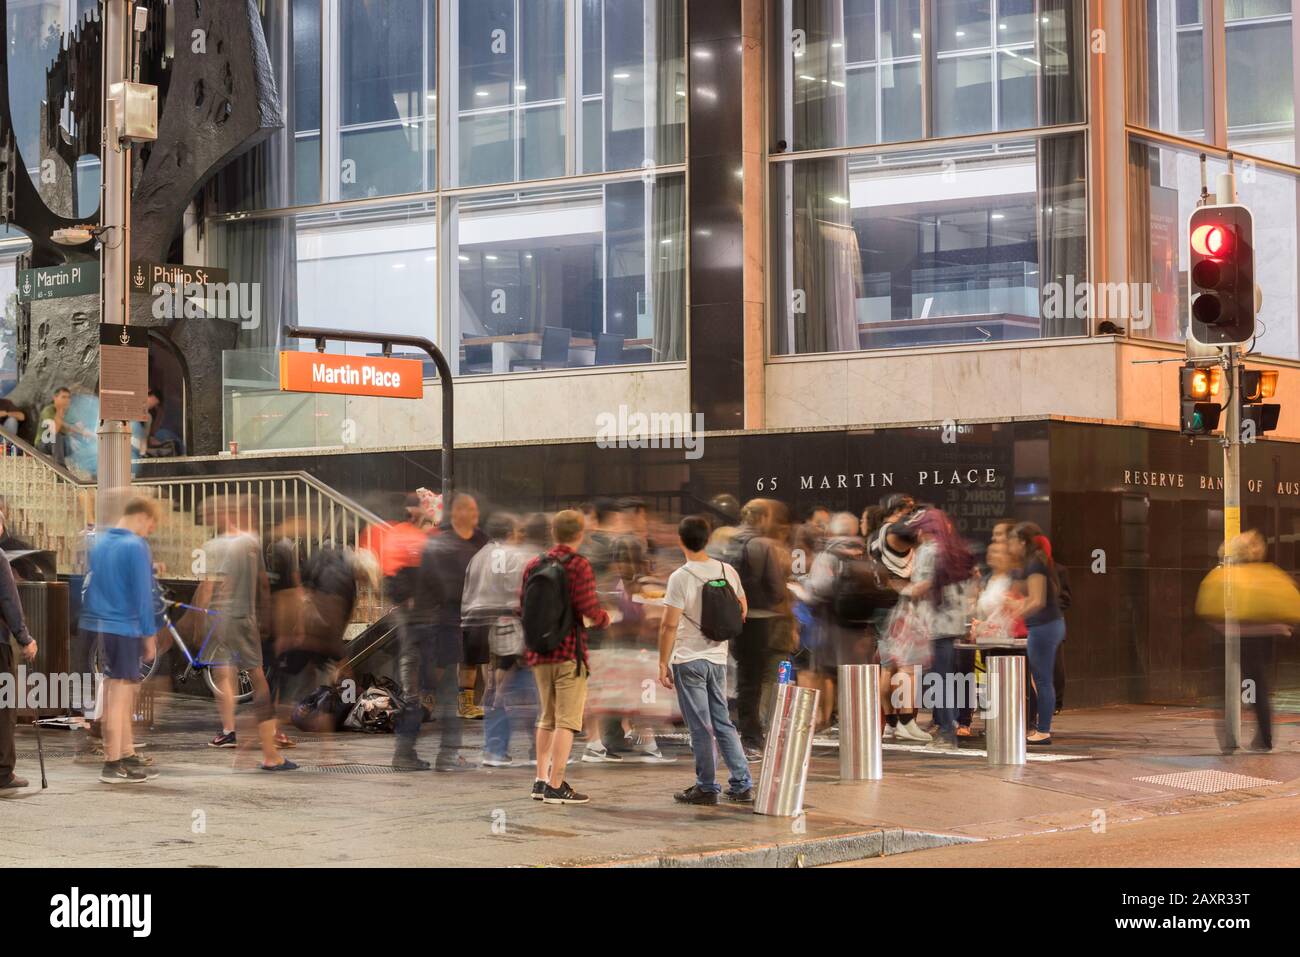 Sydney Aust. Feb 12, 2020: Homeless people cue up at night for free pizza and drink served by volunteers near The Reserve Bank in Martin Place, Sydney Stock Photo